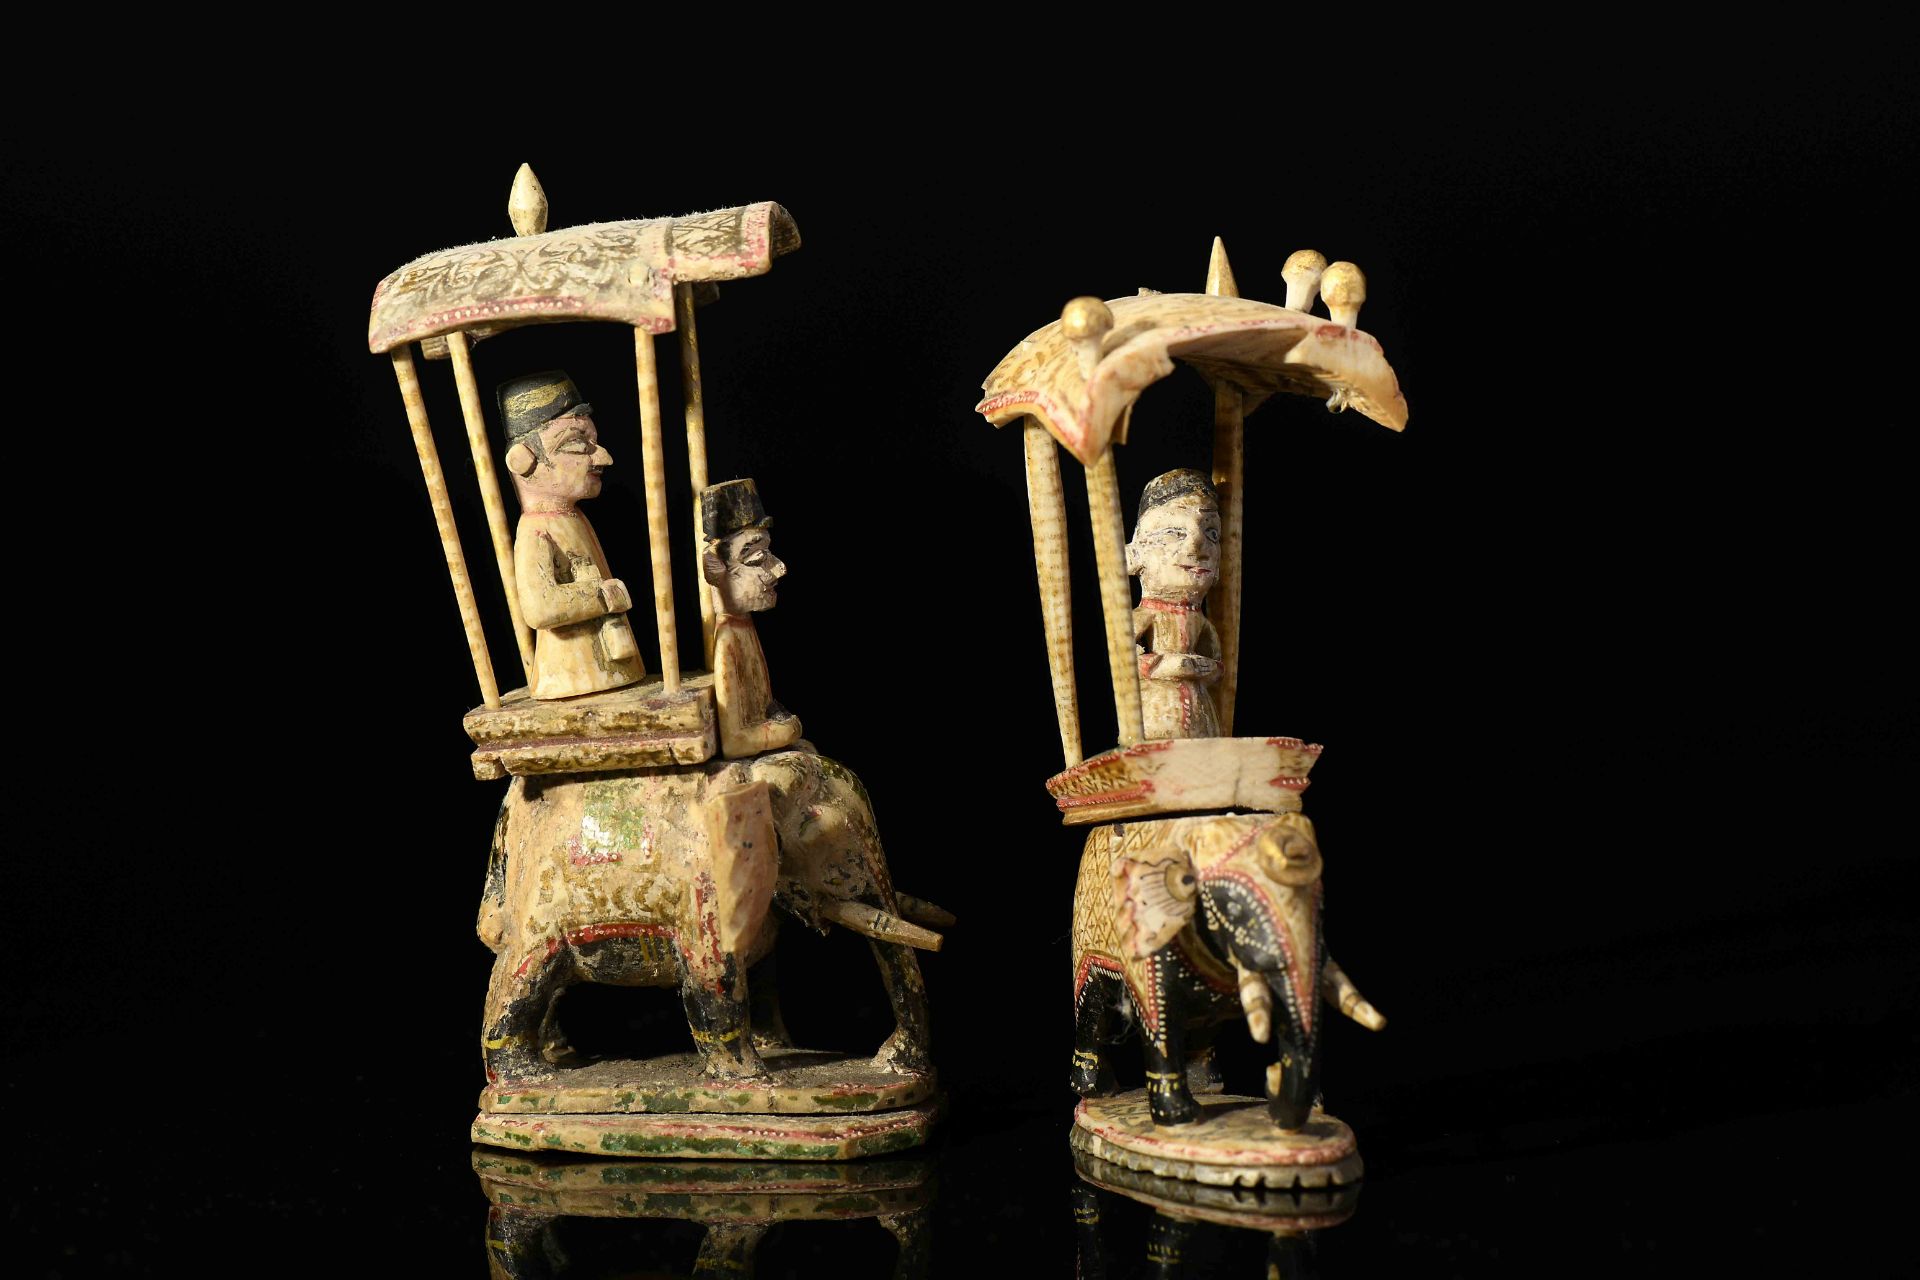 Two chess pieces - white king and queen «howdah»